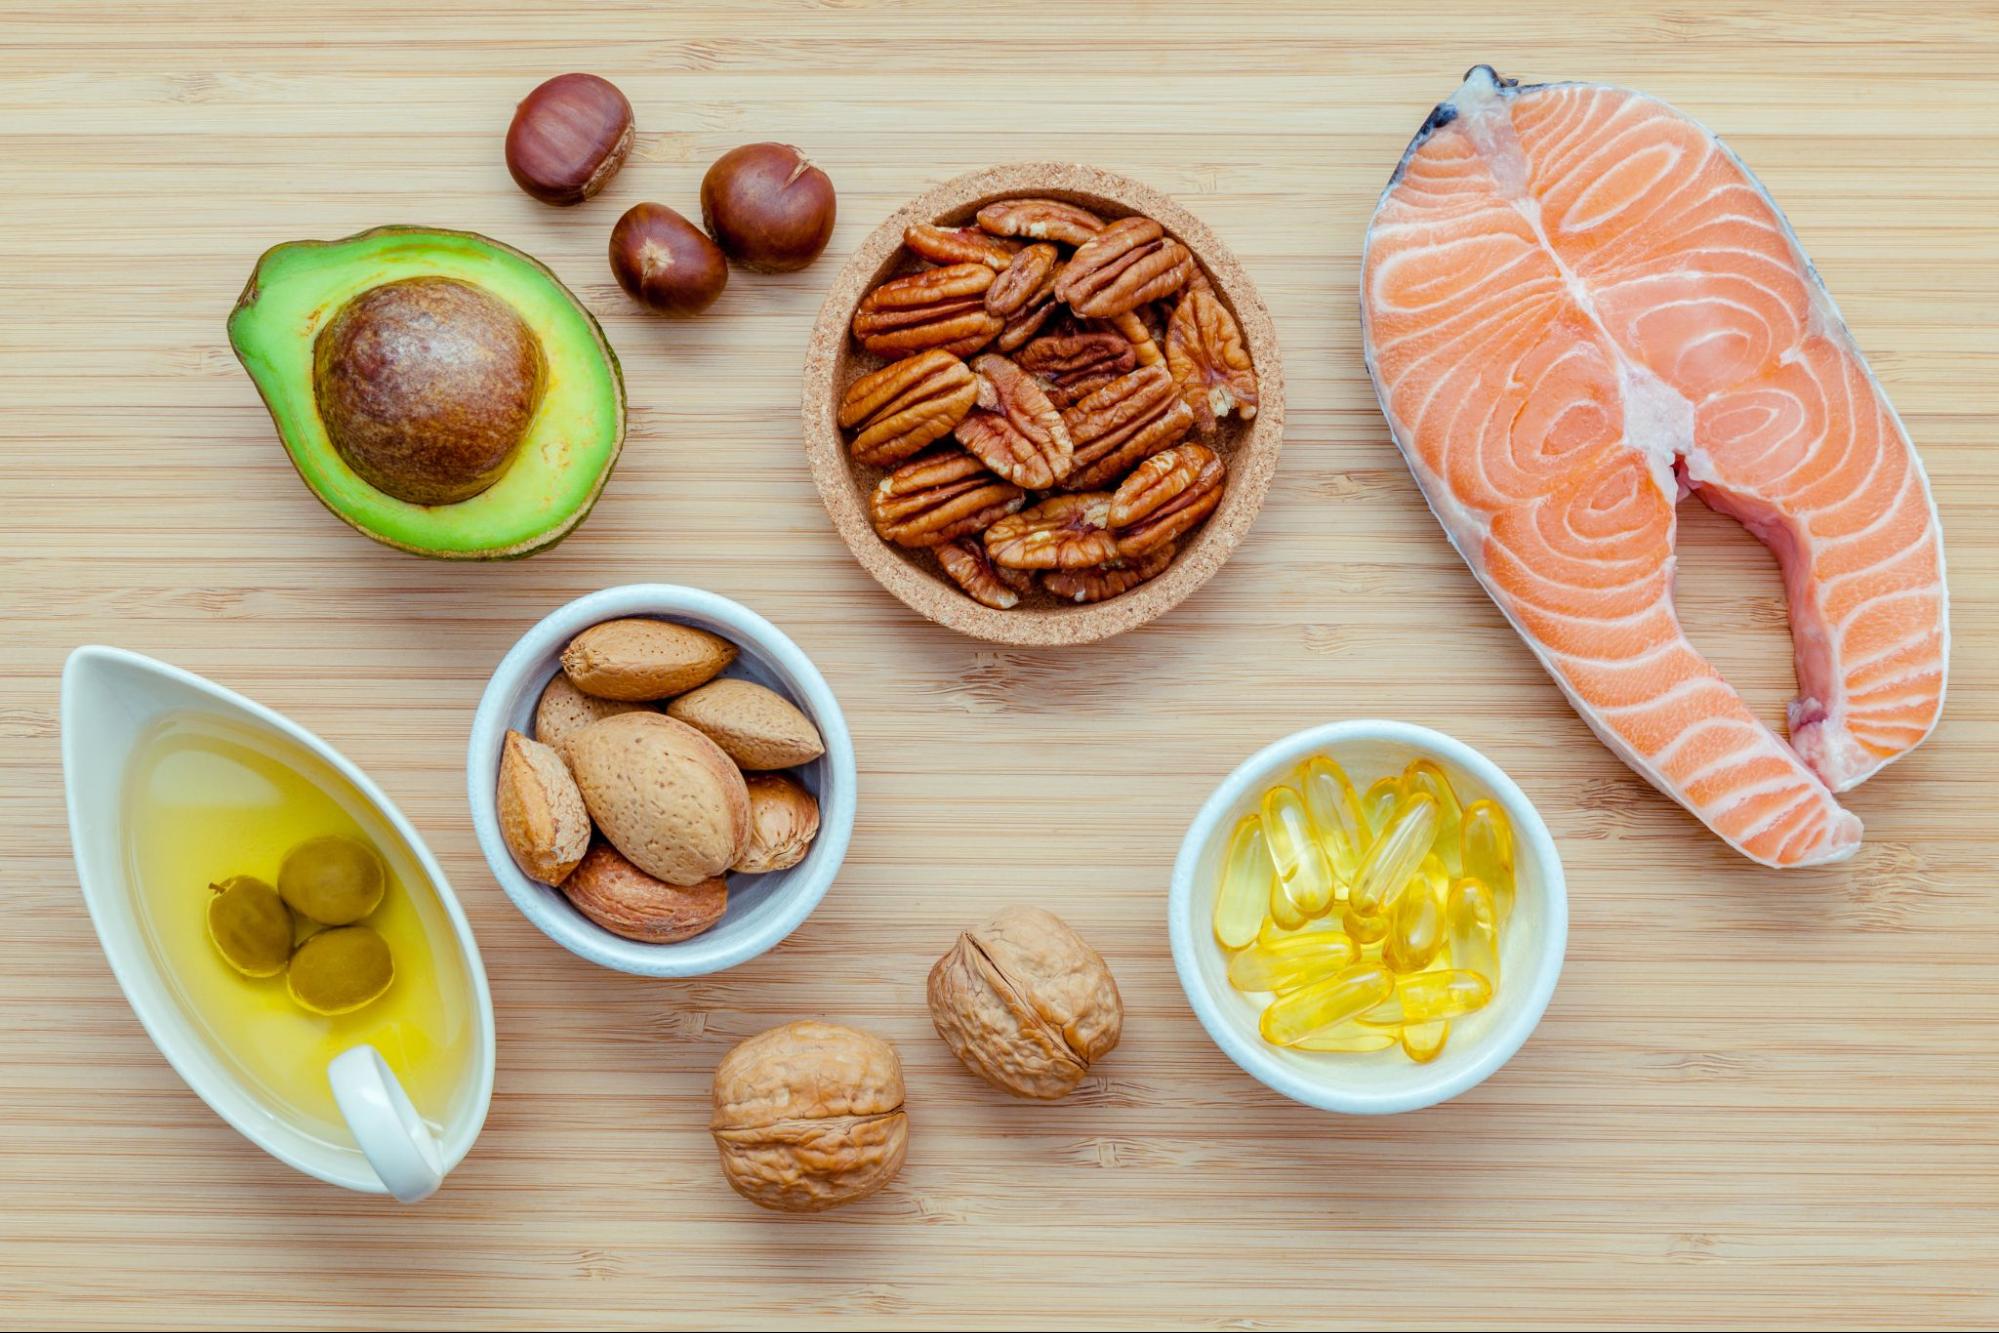 There are a variety of myths about eating fats, but the YMCA shares the truth about fats and diets.